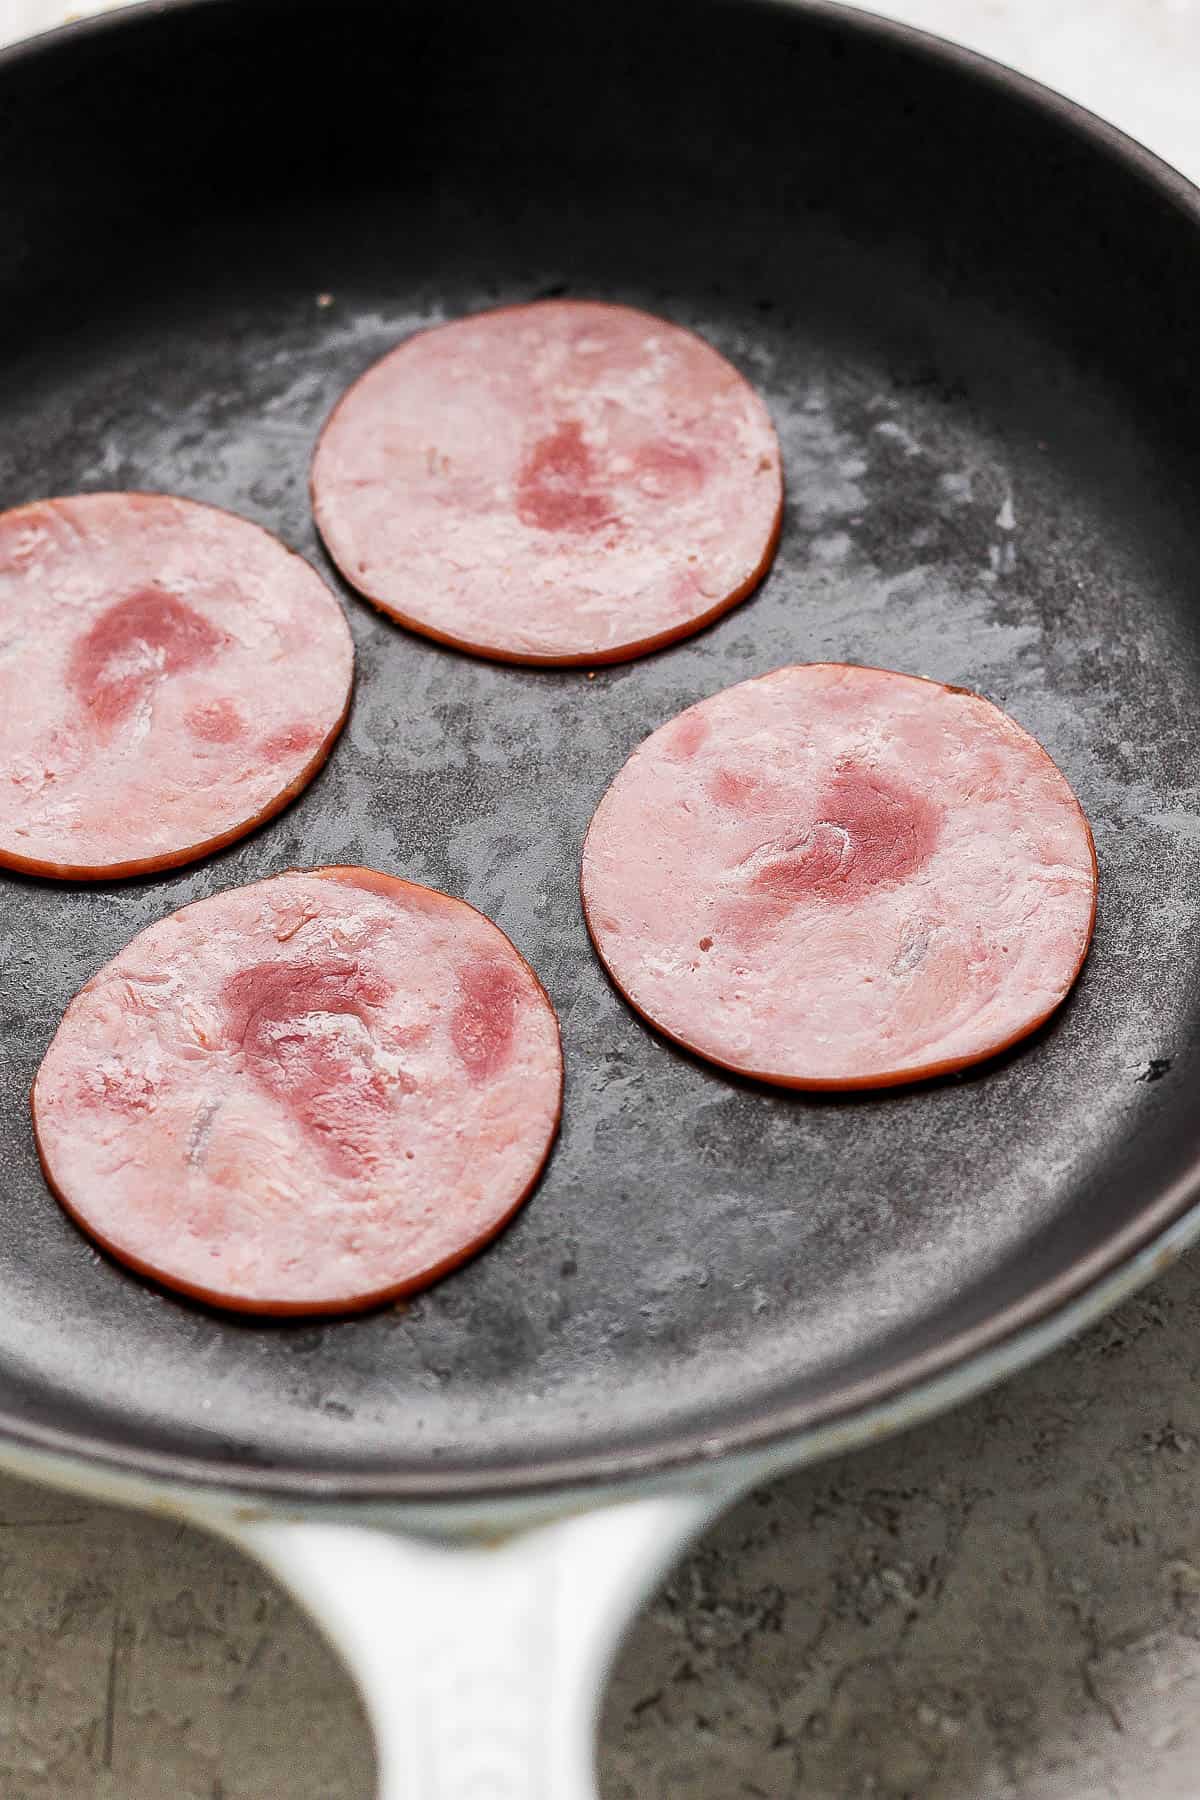 A skillet with slices of Canadian bacon in it.